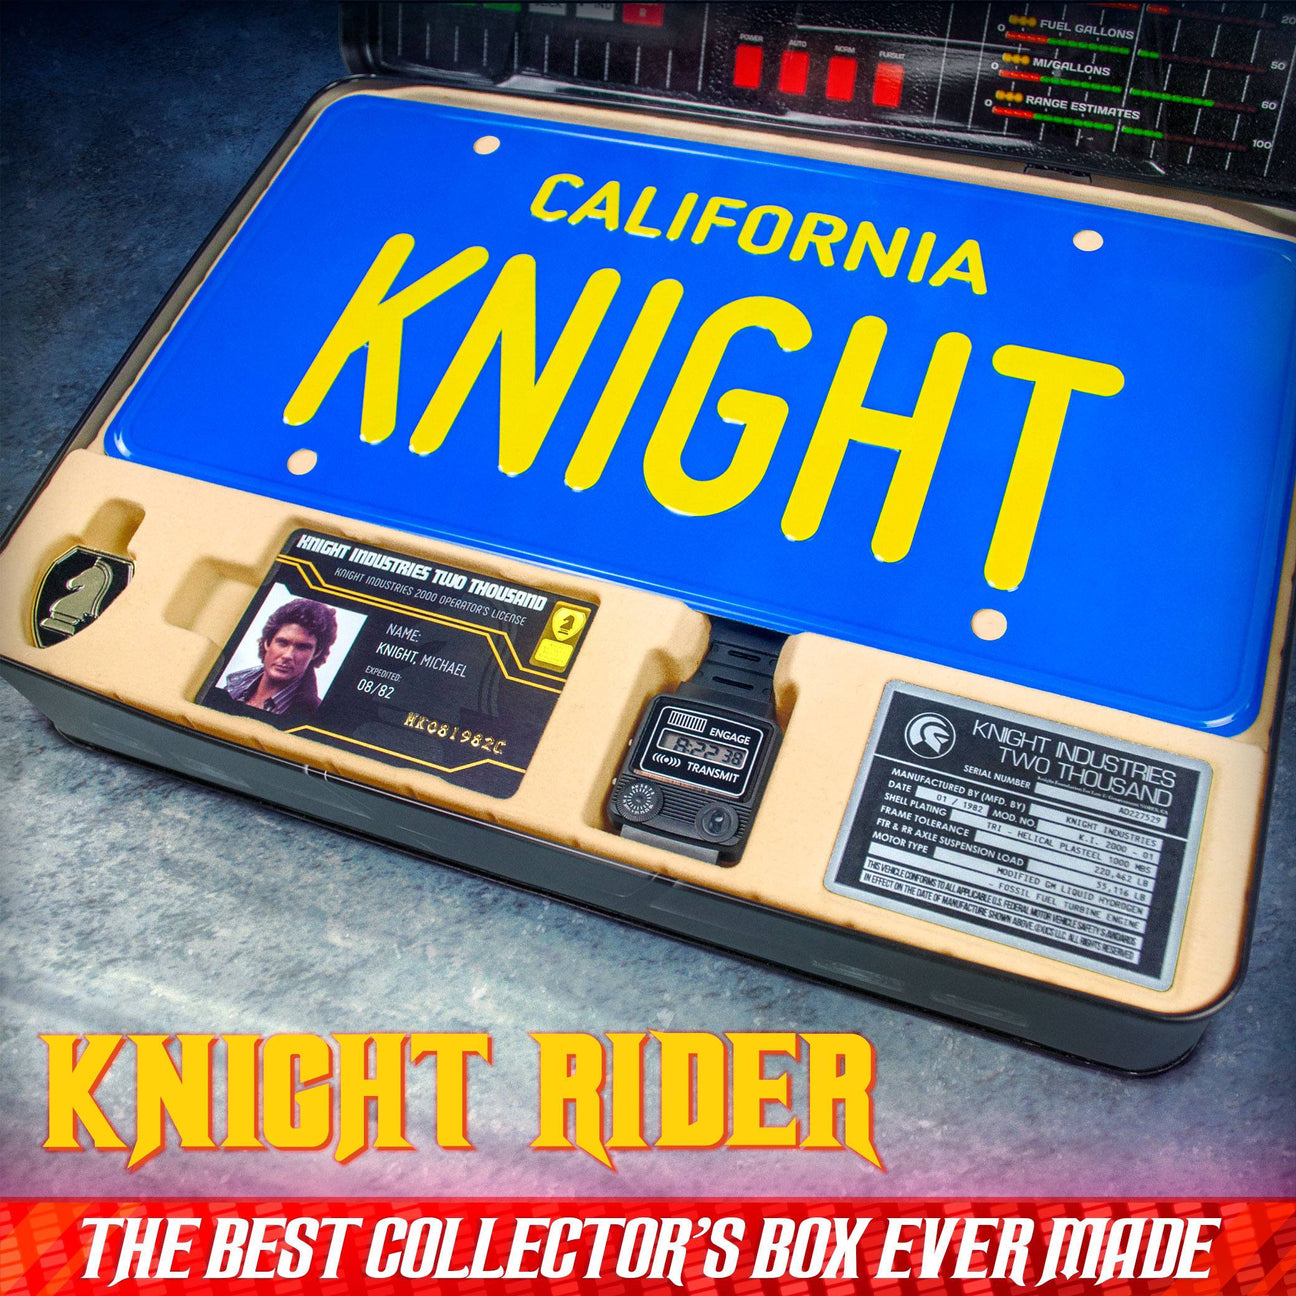 Knight Rider: F.L.A.G Agent Kit-Replik-Dr. Collector-Mighty Underground